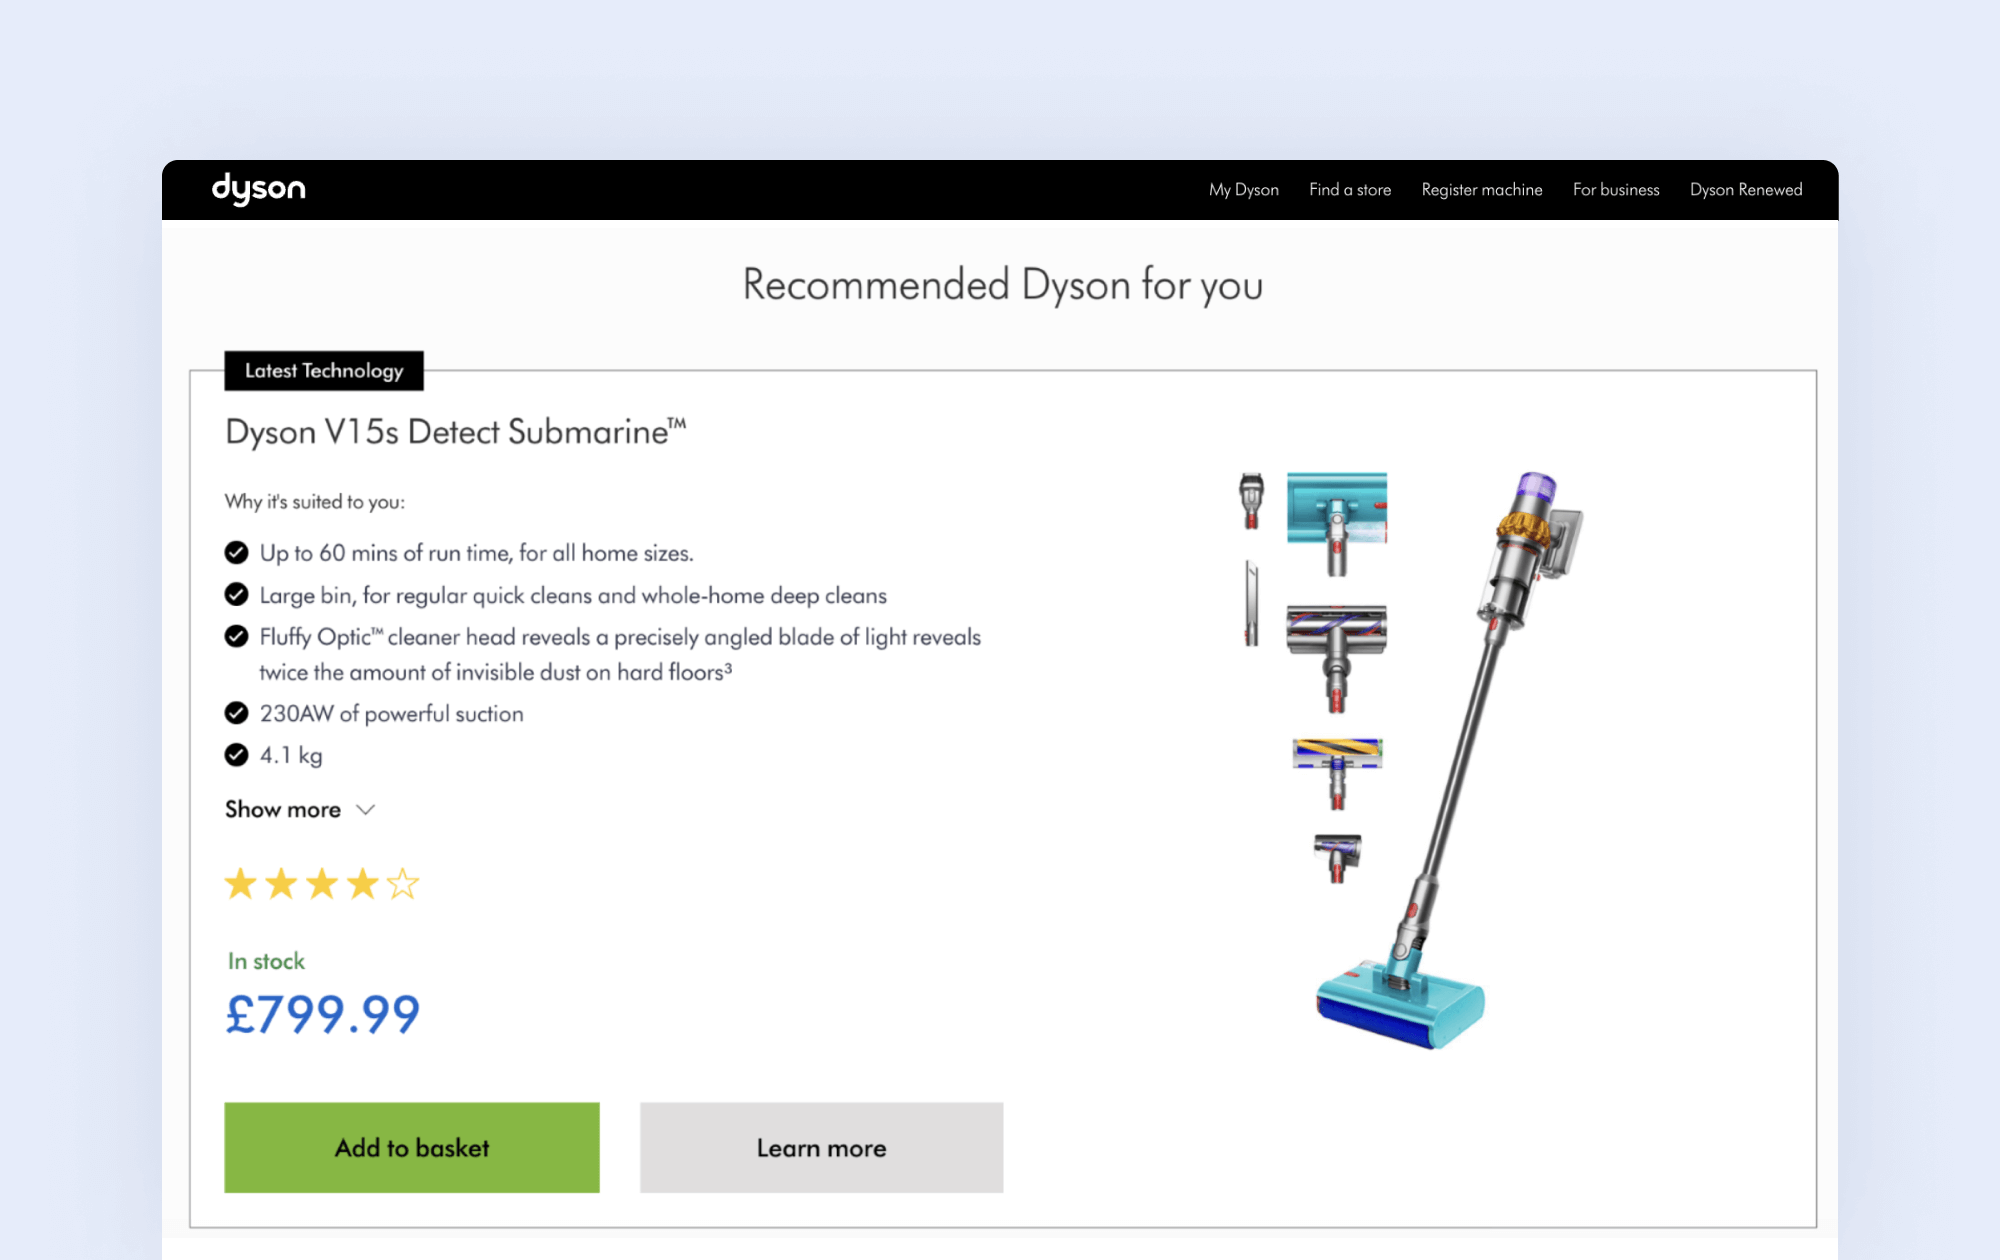 Dyson personalized product recommendations